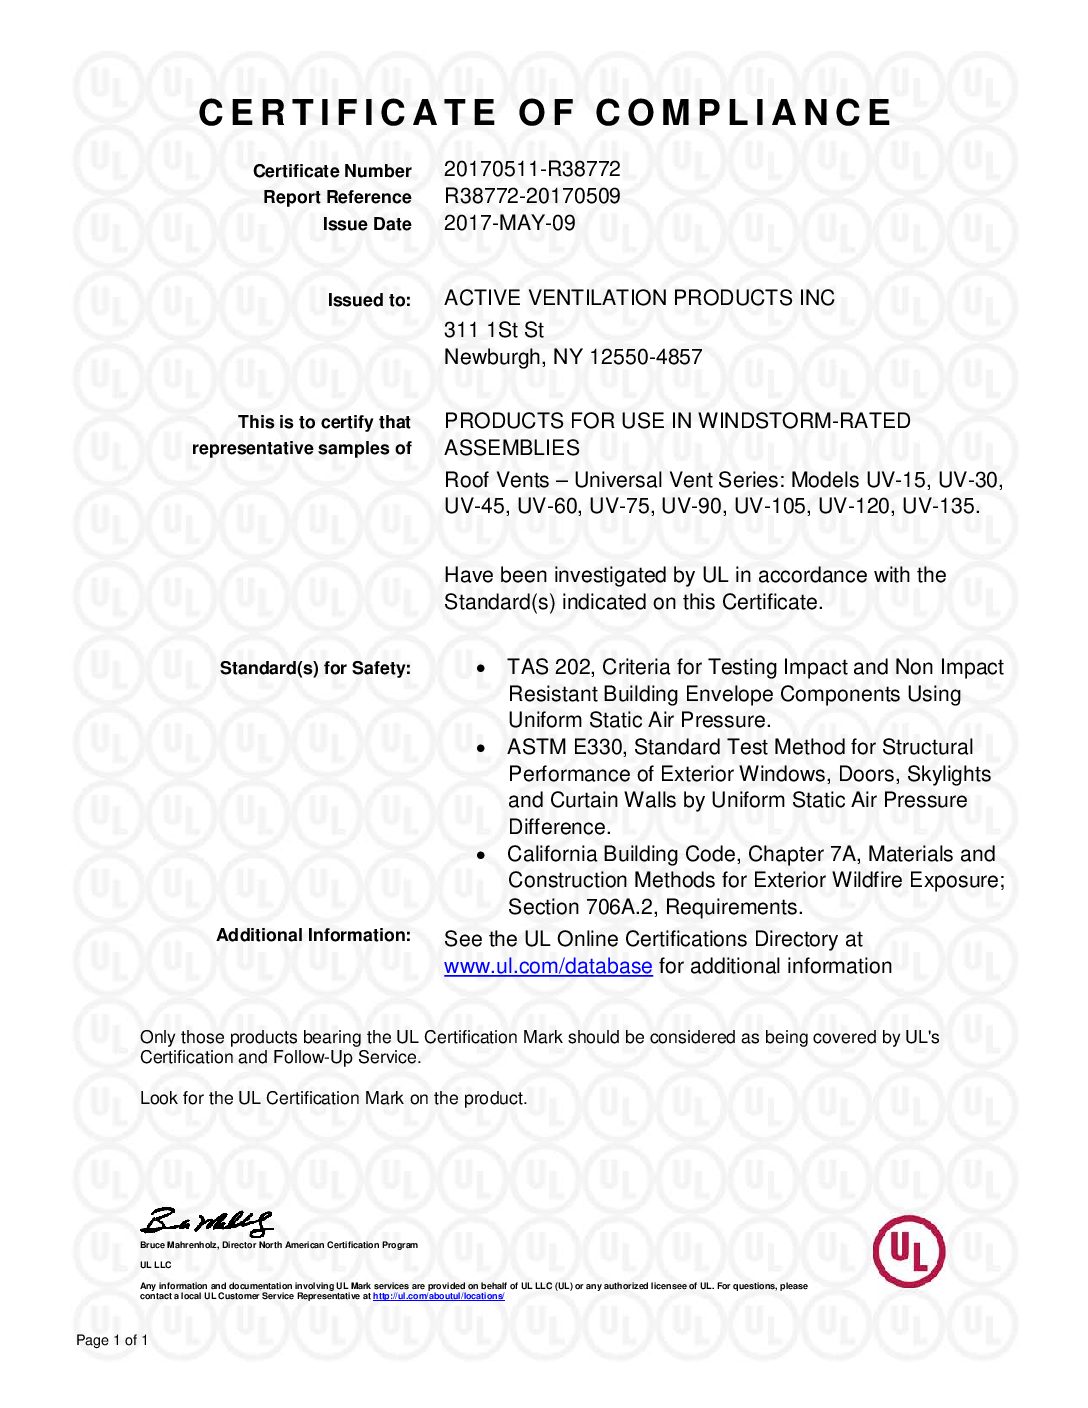 UL Certificate of Compliance Active Ventilation Products Universal Vent